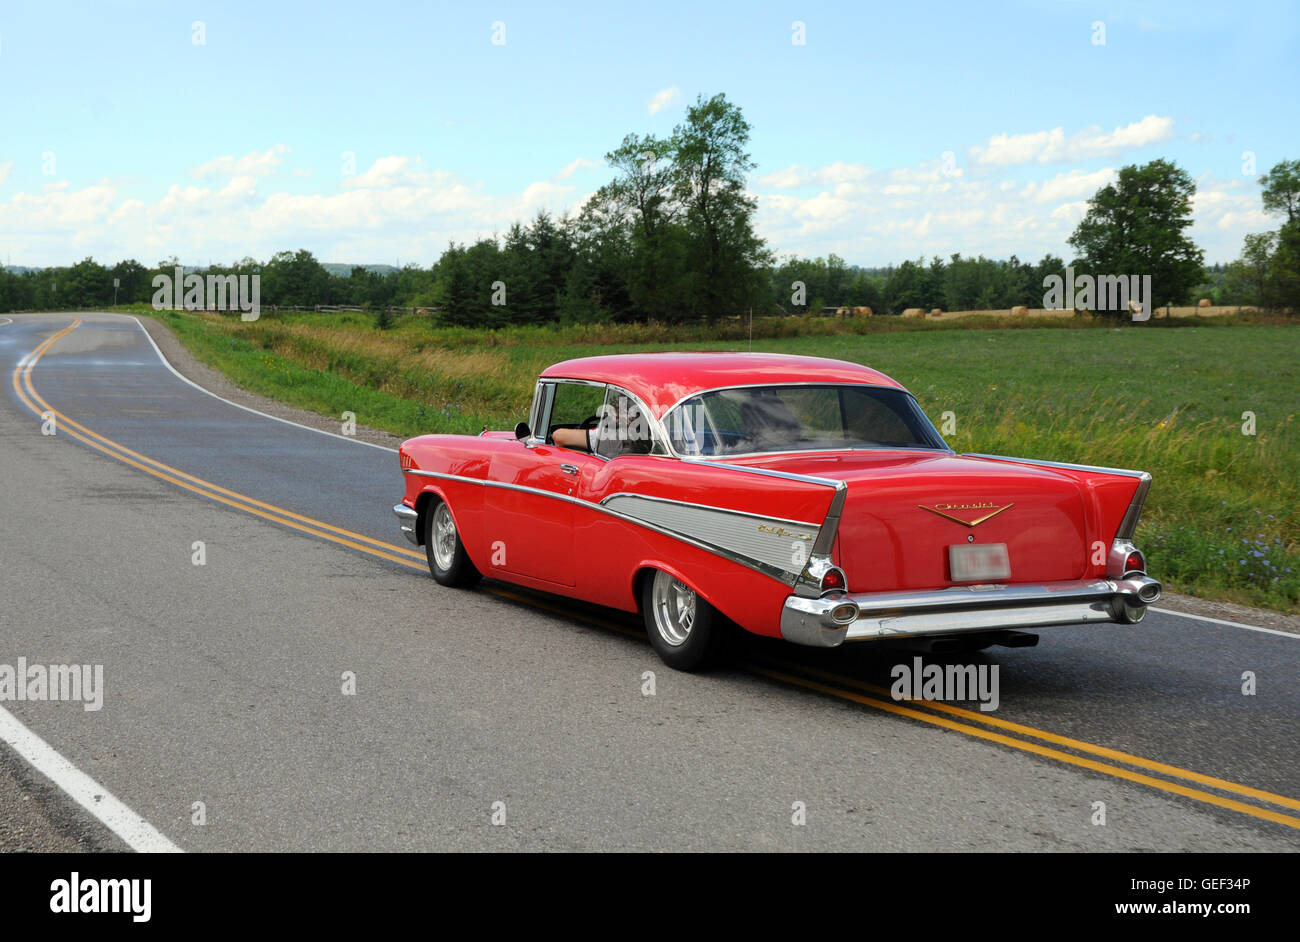 Chevrolet bel air on the road Stock Photo